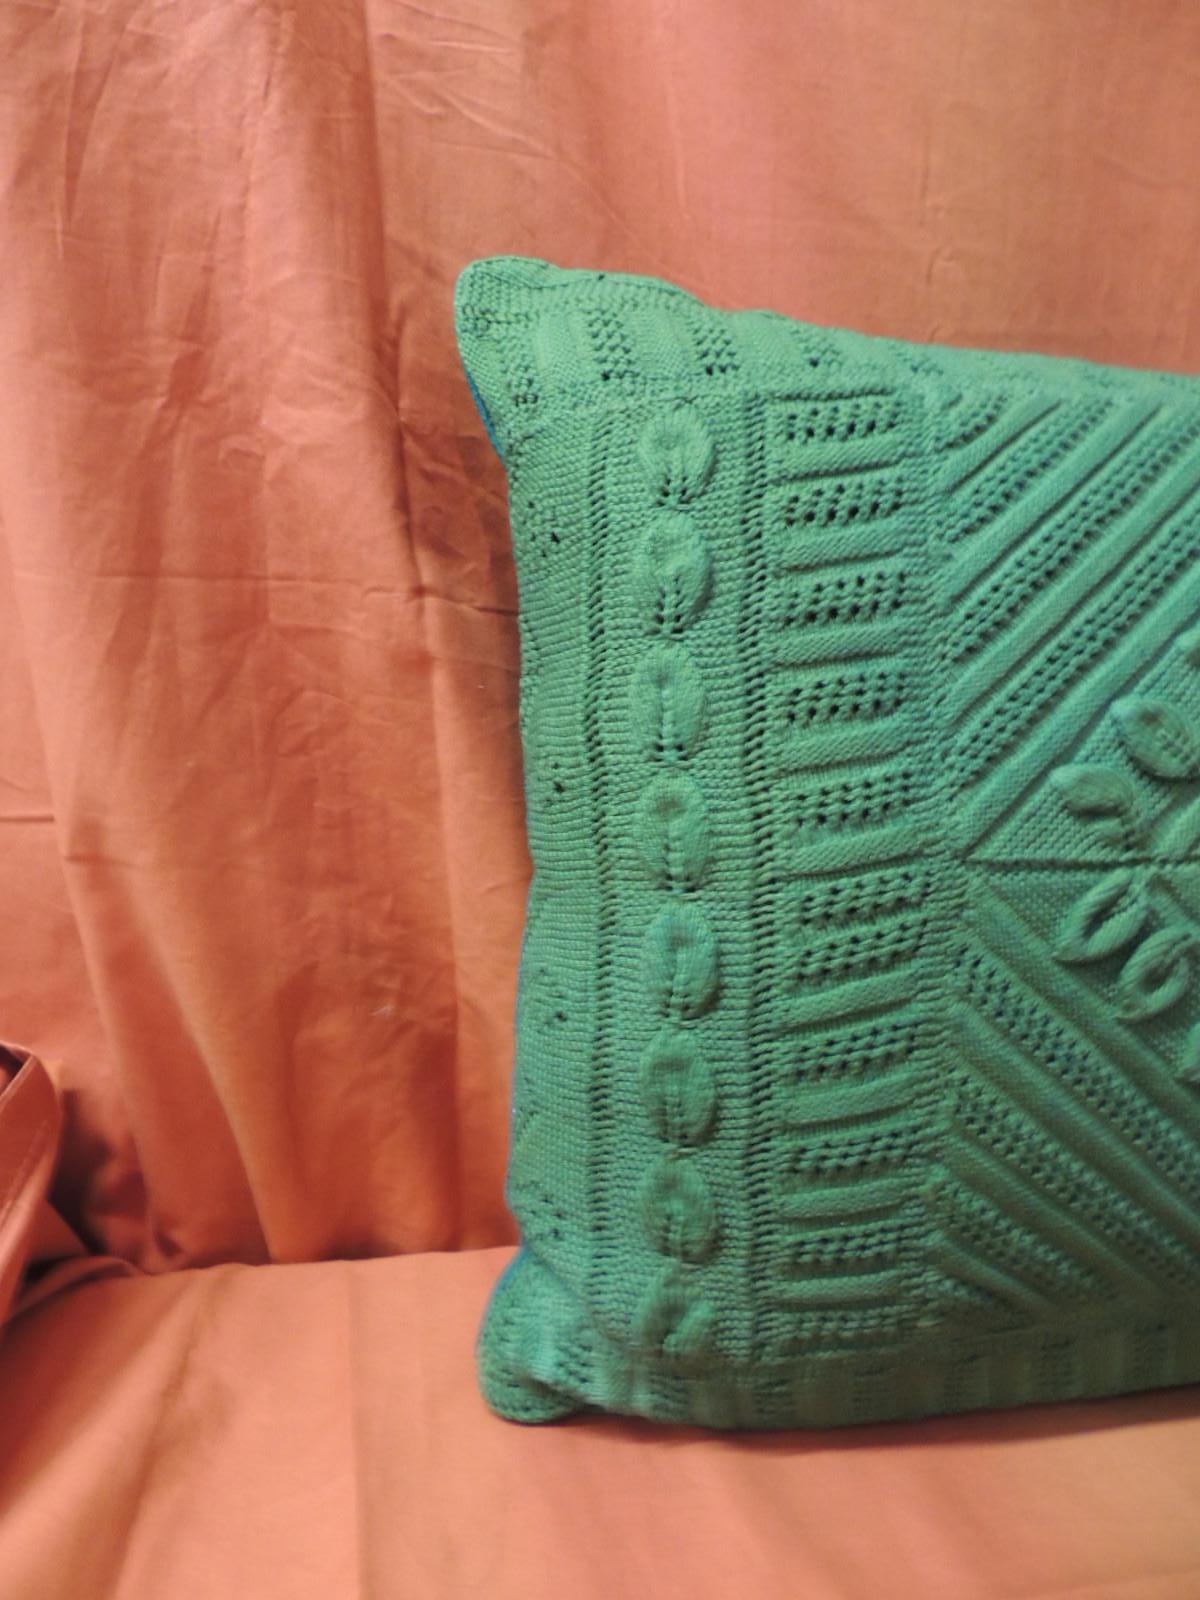 Vintage Kelly green crochet lumbar pillow with hunter green bark-cloth backing. Boho-chic style decorative lumbar pillow. Decorative pillow handstitched (no zipper closure.) Throw pillow handcrafted and designed in the USA. Custom made pillow